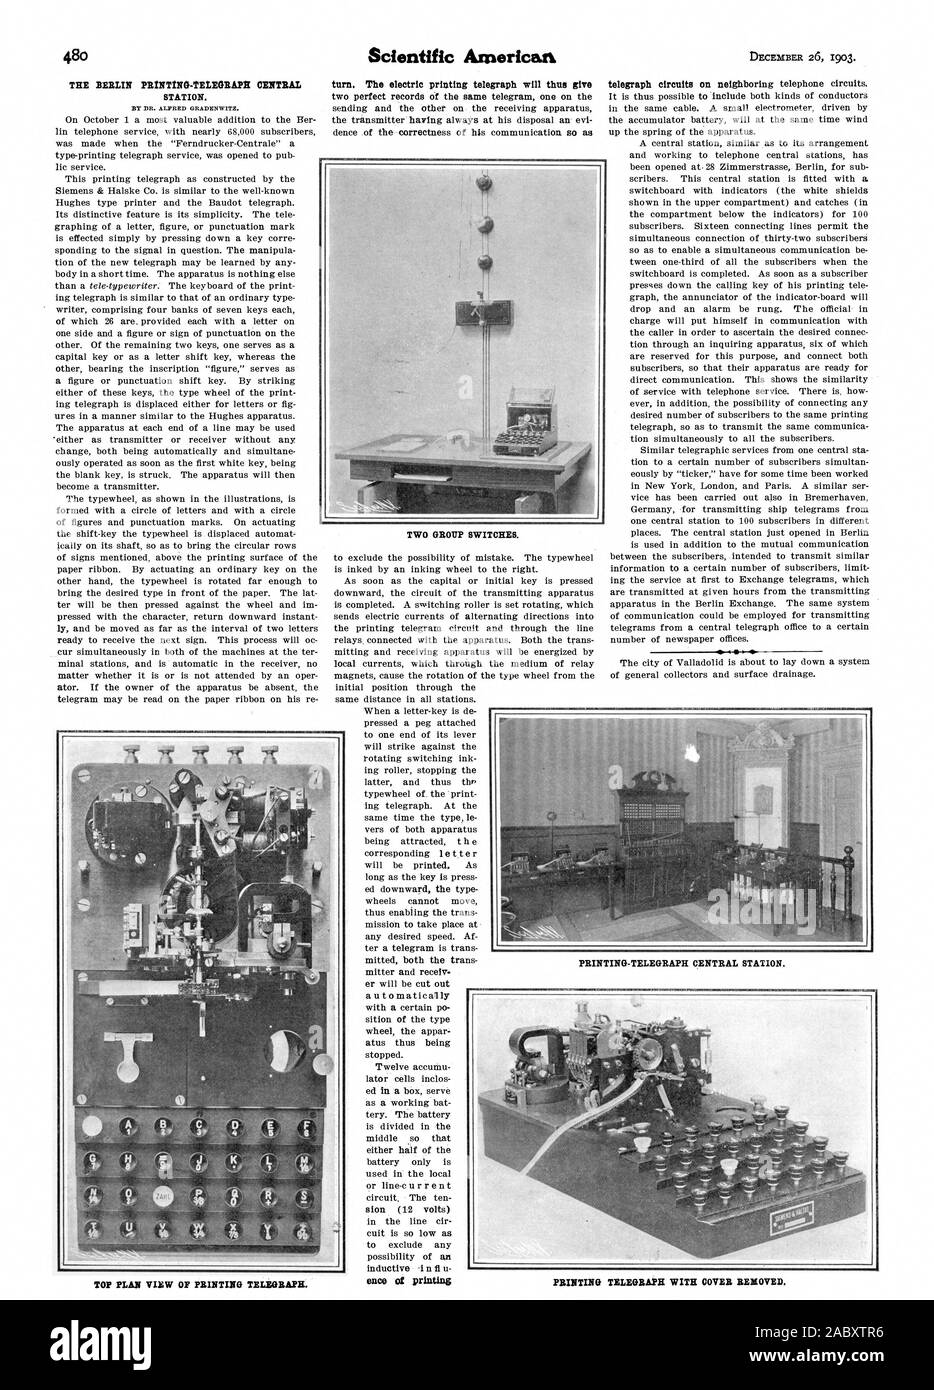 TWO GROUP SWITCHES. THE BERLIN PIUNTINO-TELEGRAPII CENTRAL STATION. turn. The electric printing telegraph will thus give ence of printing TOP PLAN VIEW OF PRINTING TELEGRAPH. PRINTING-TELEGRAPH CENTRAL STATION. PRINTING TELEGRAPH WITH COVER REMOVED., scientific american, 1903-12-26 Stock Photo